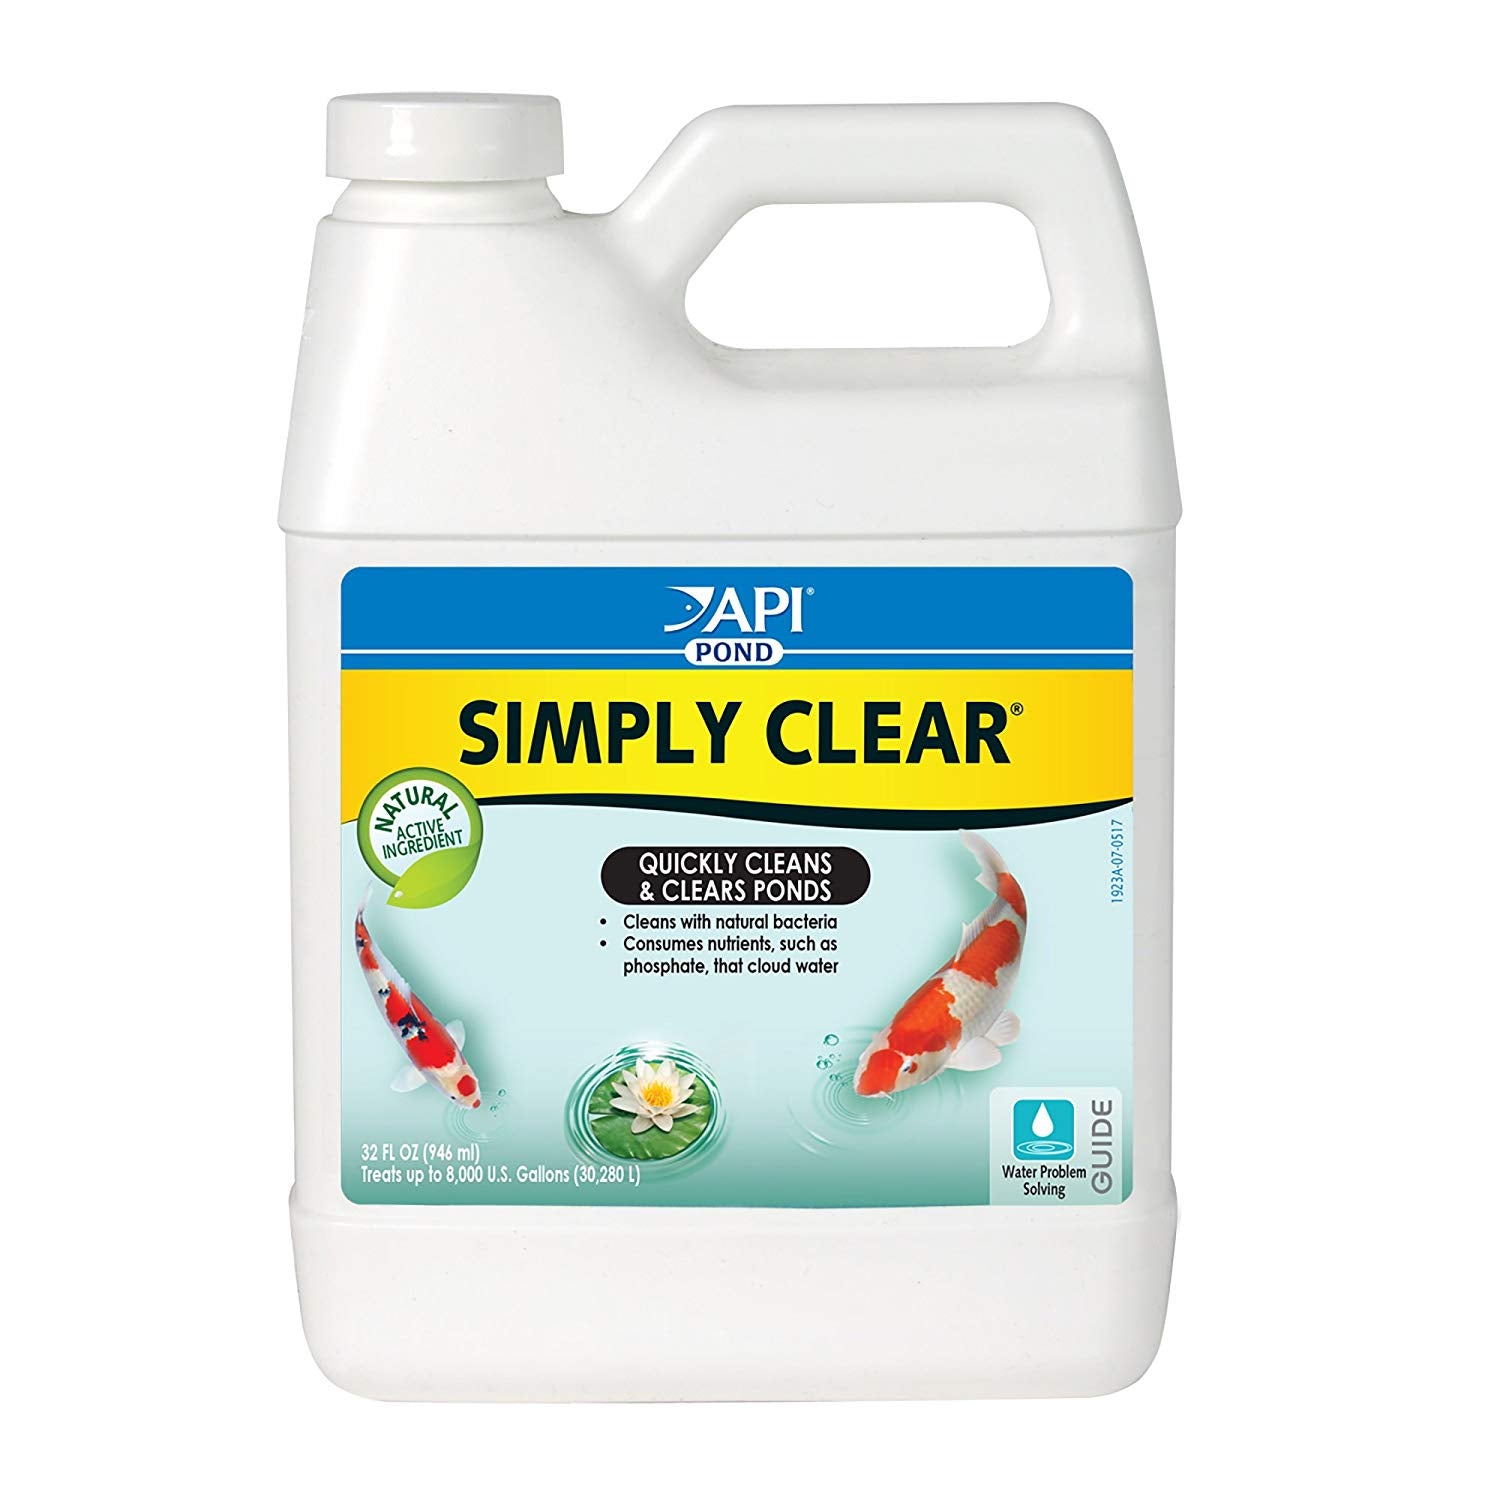 API Pond Simply-Clear with Barley Quickly Cleans and Clears Ponds